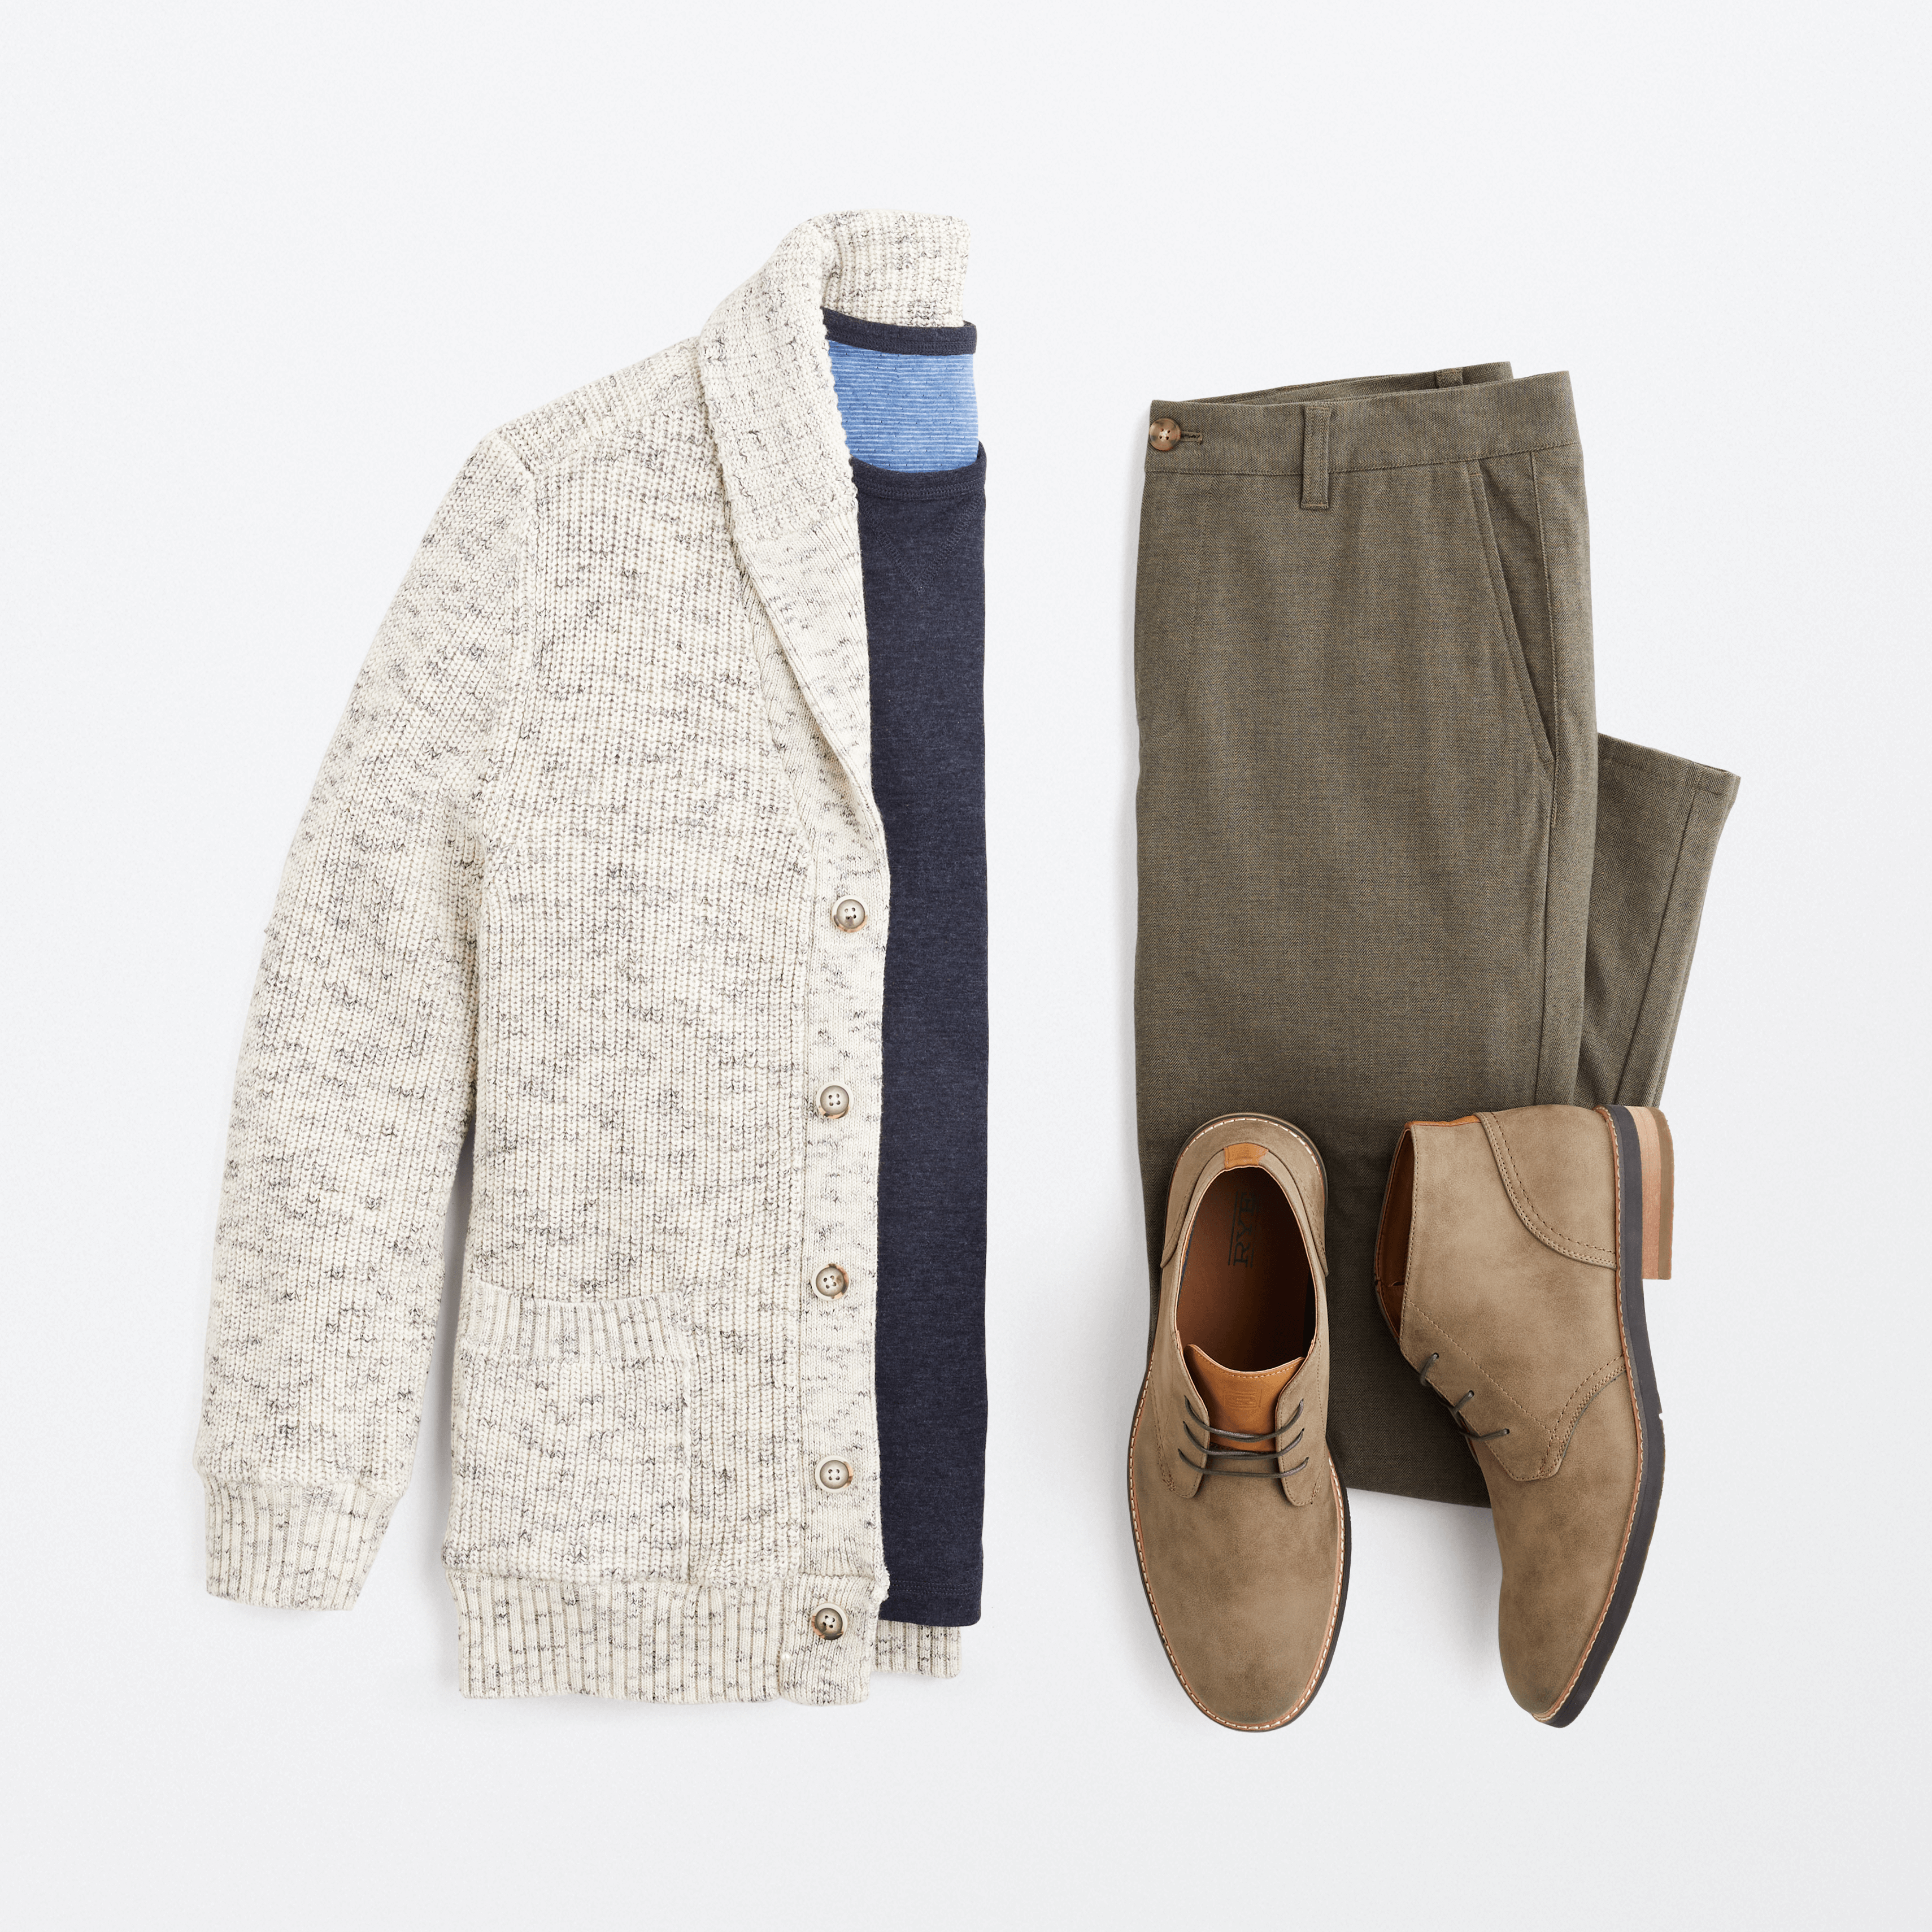 How to Wear Cardigans for Men, Style Guide